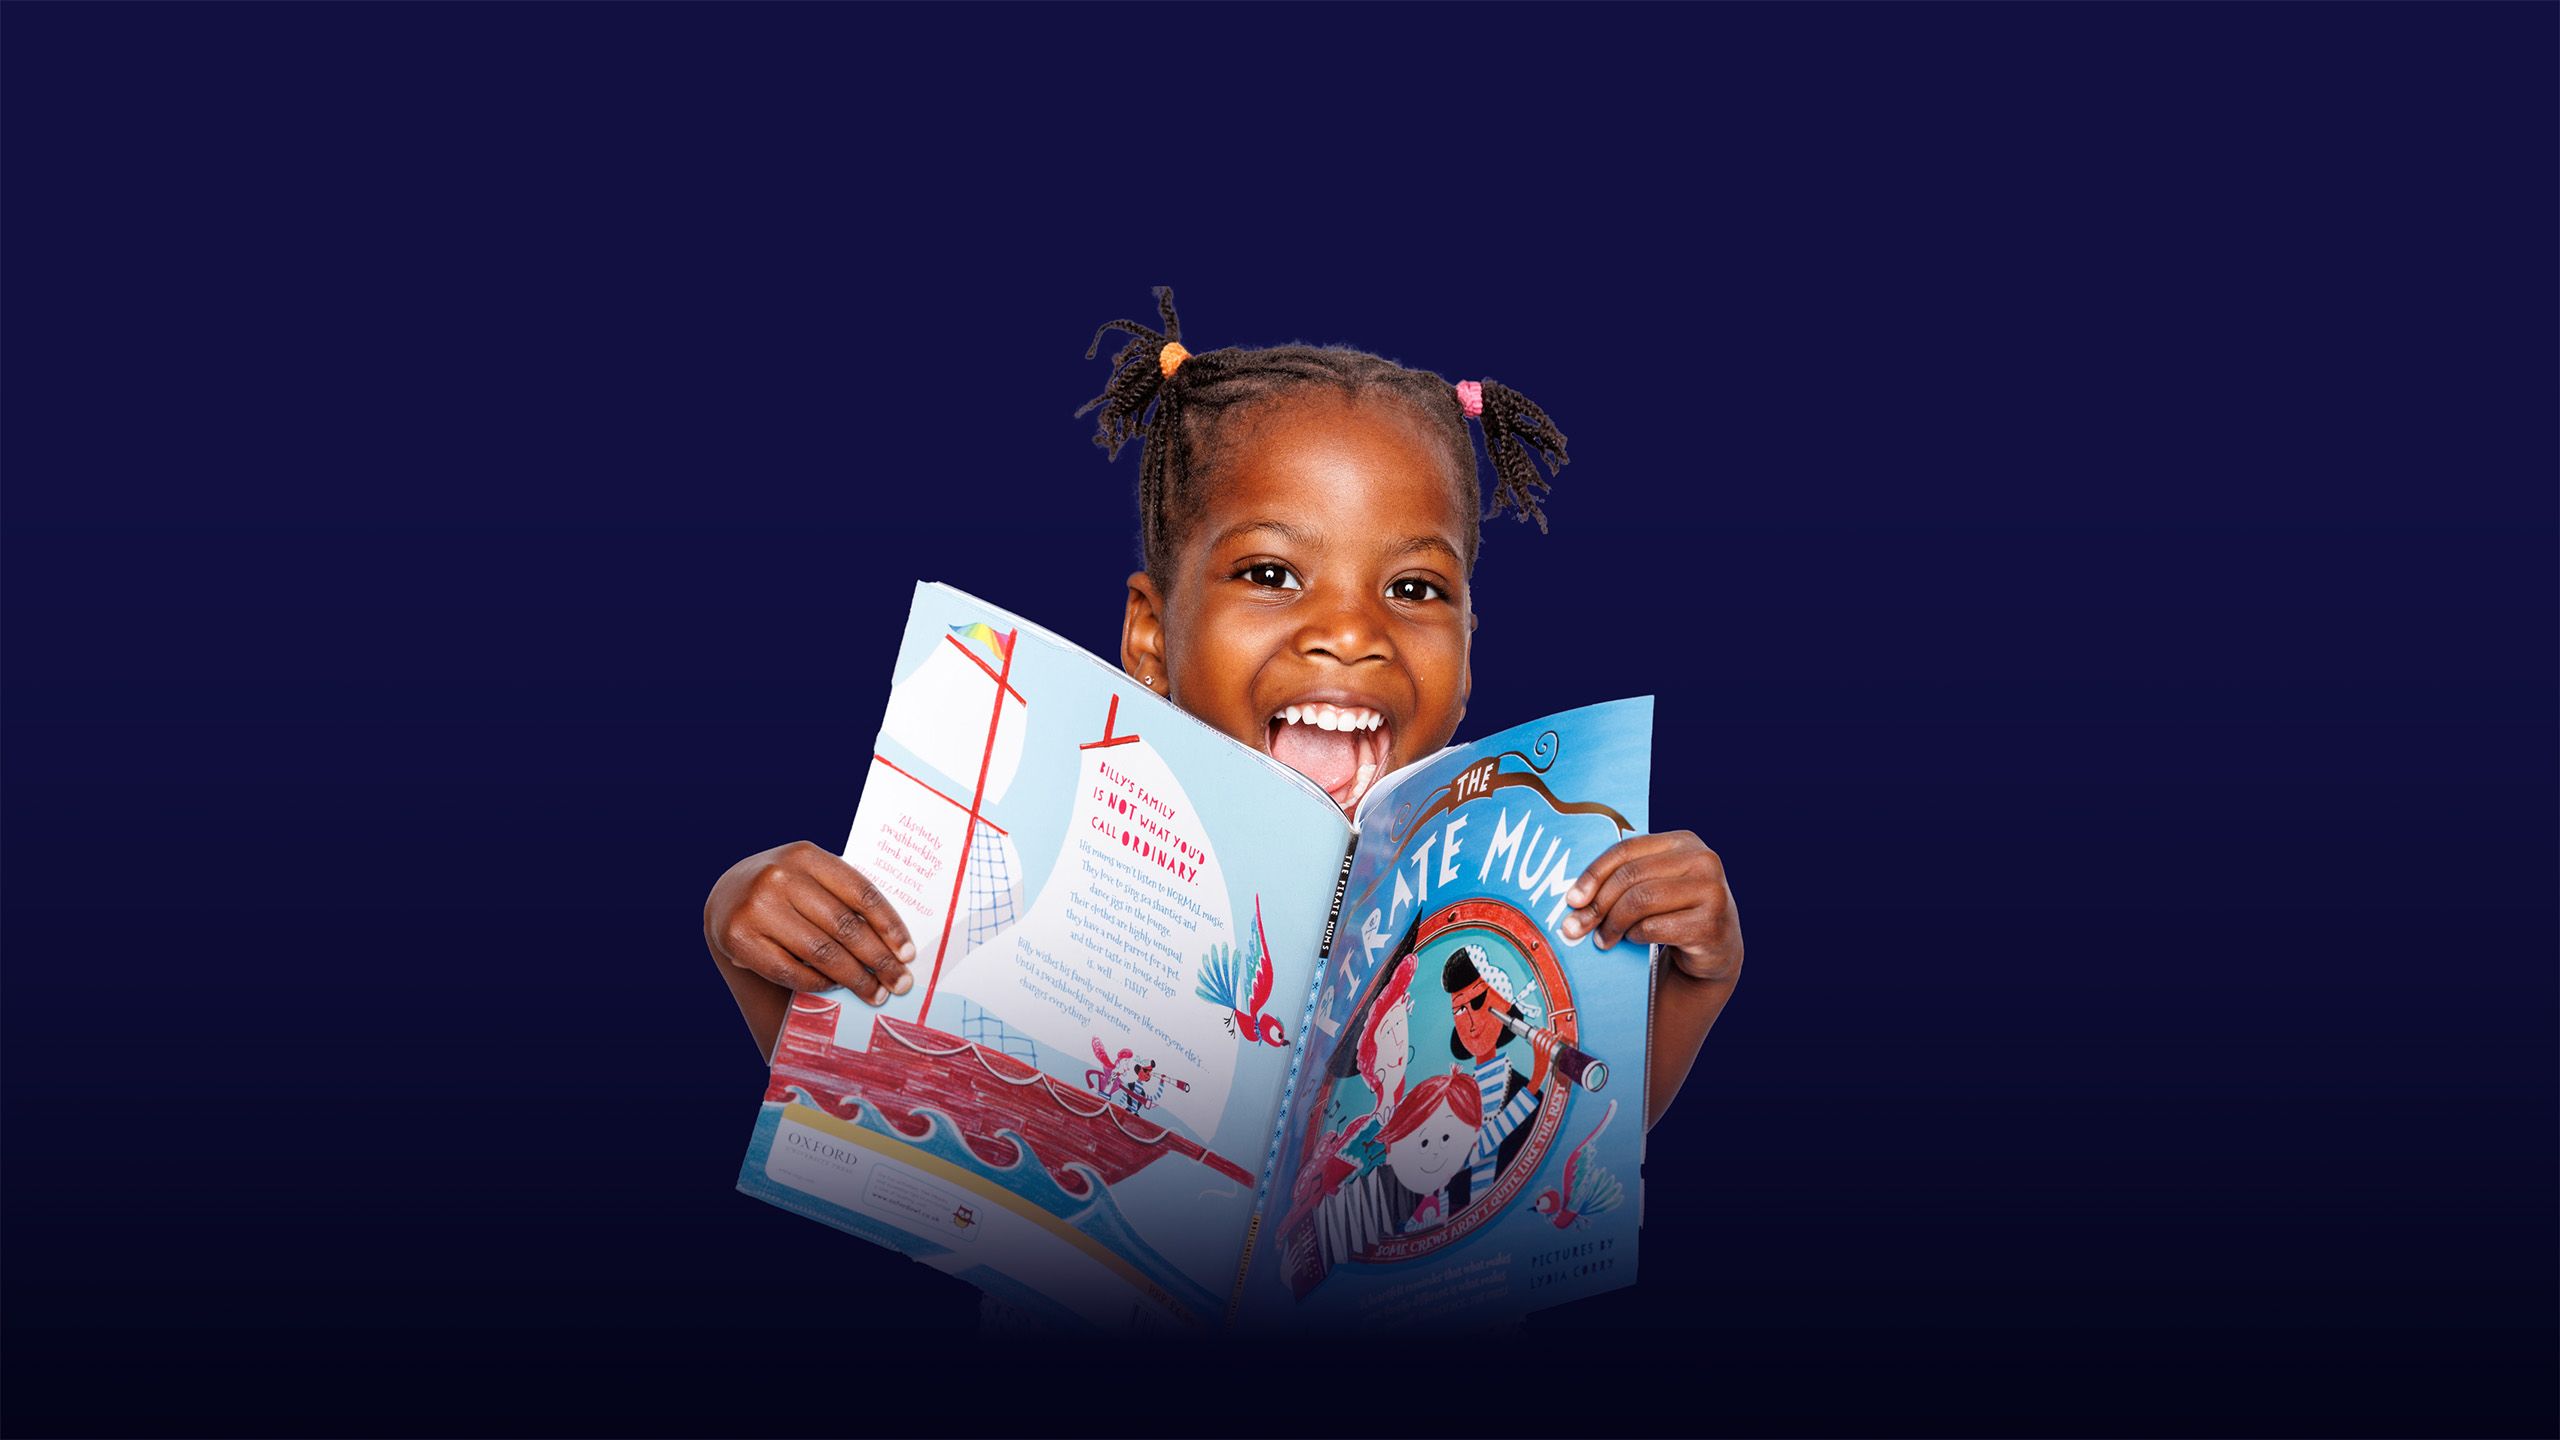 A little girl against a dark background, looking straight ahead with an open mouth smile, holding an opened book, with an overlay of the text inspiring minds 